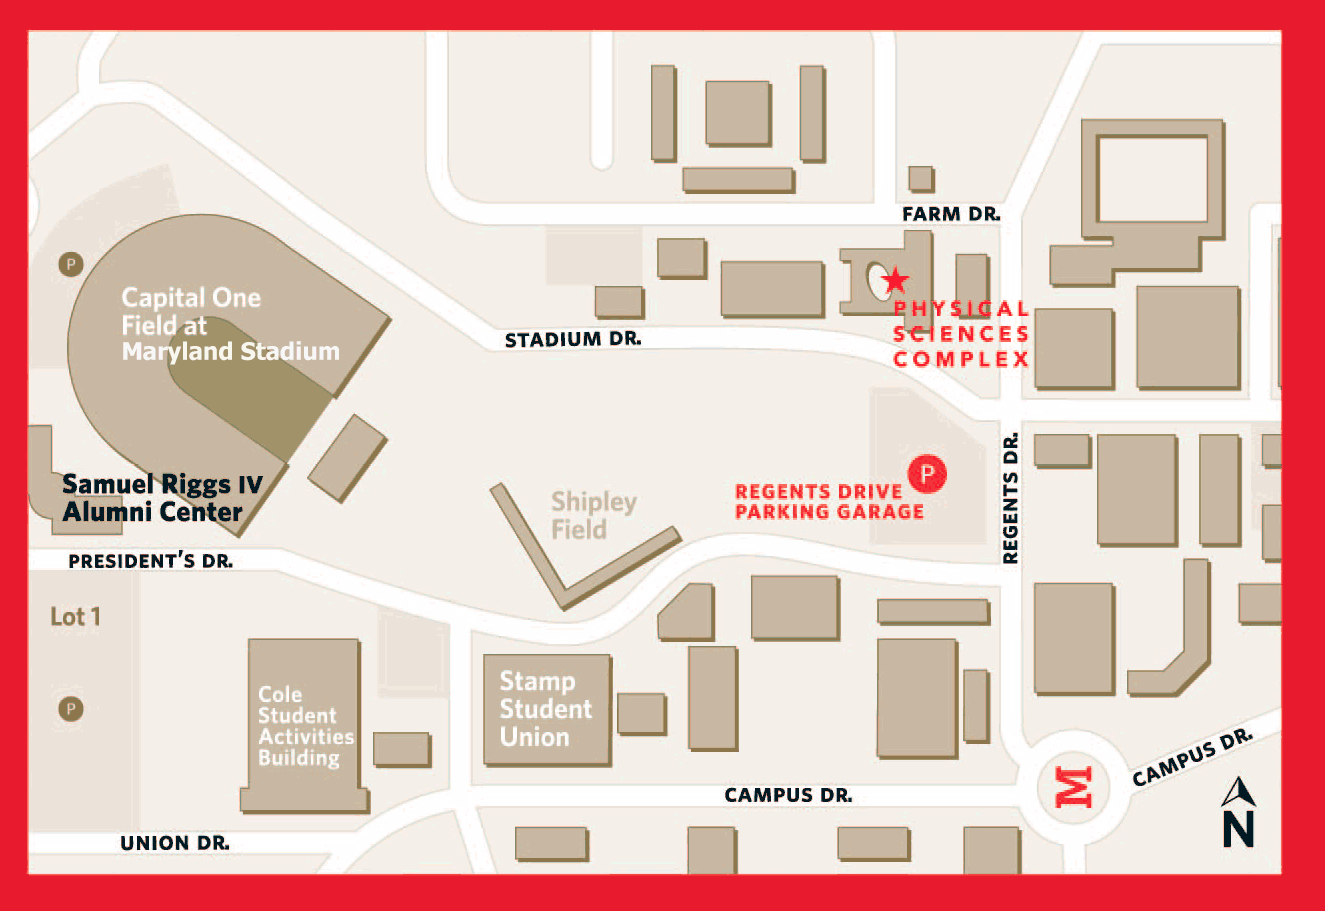 Physical Sciences Complex map